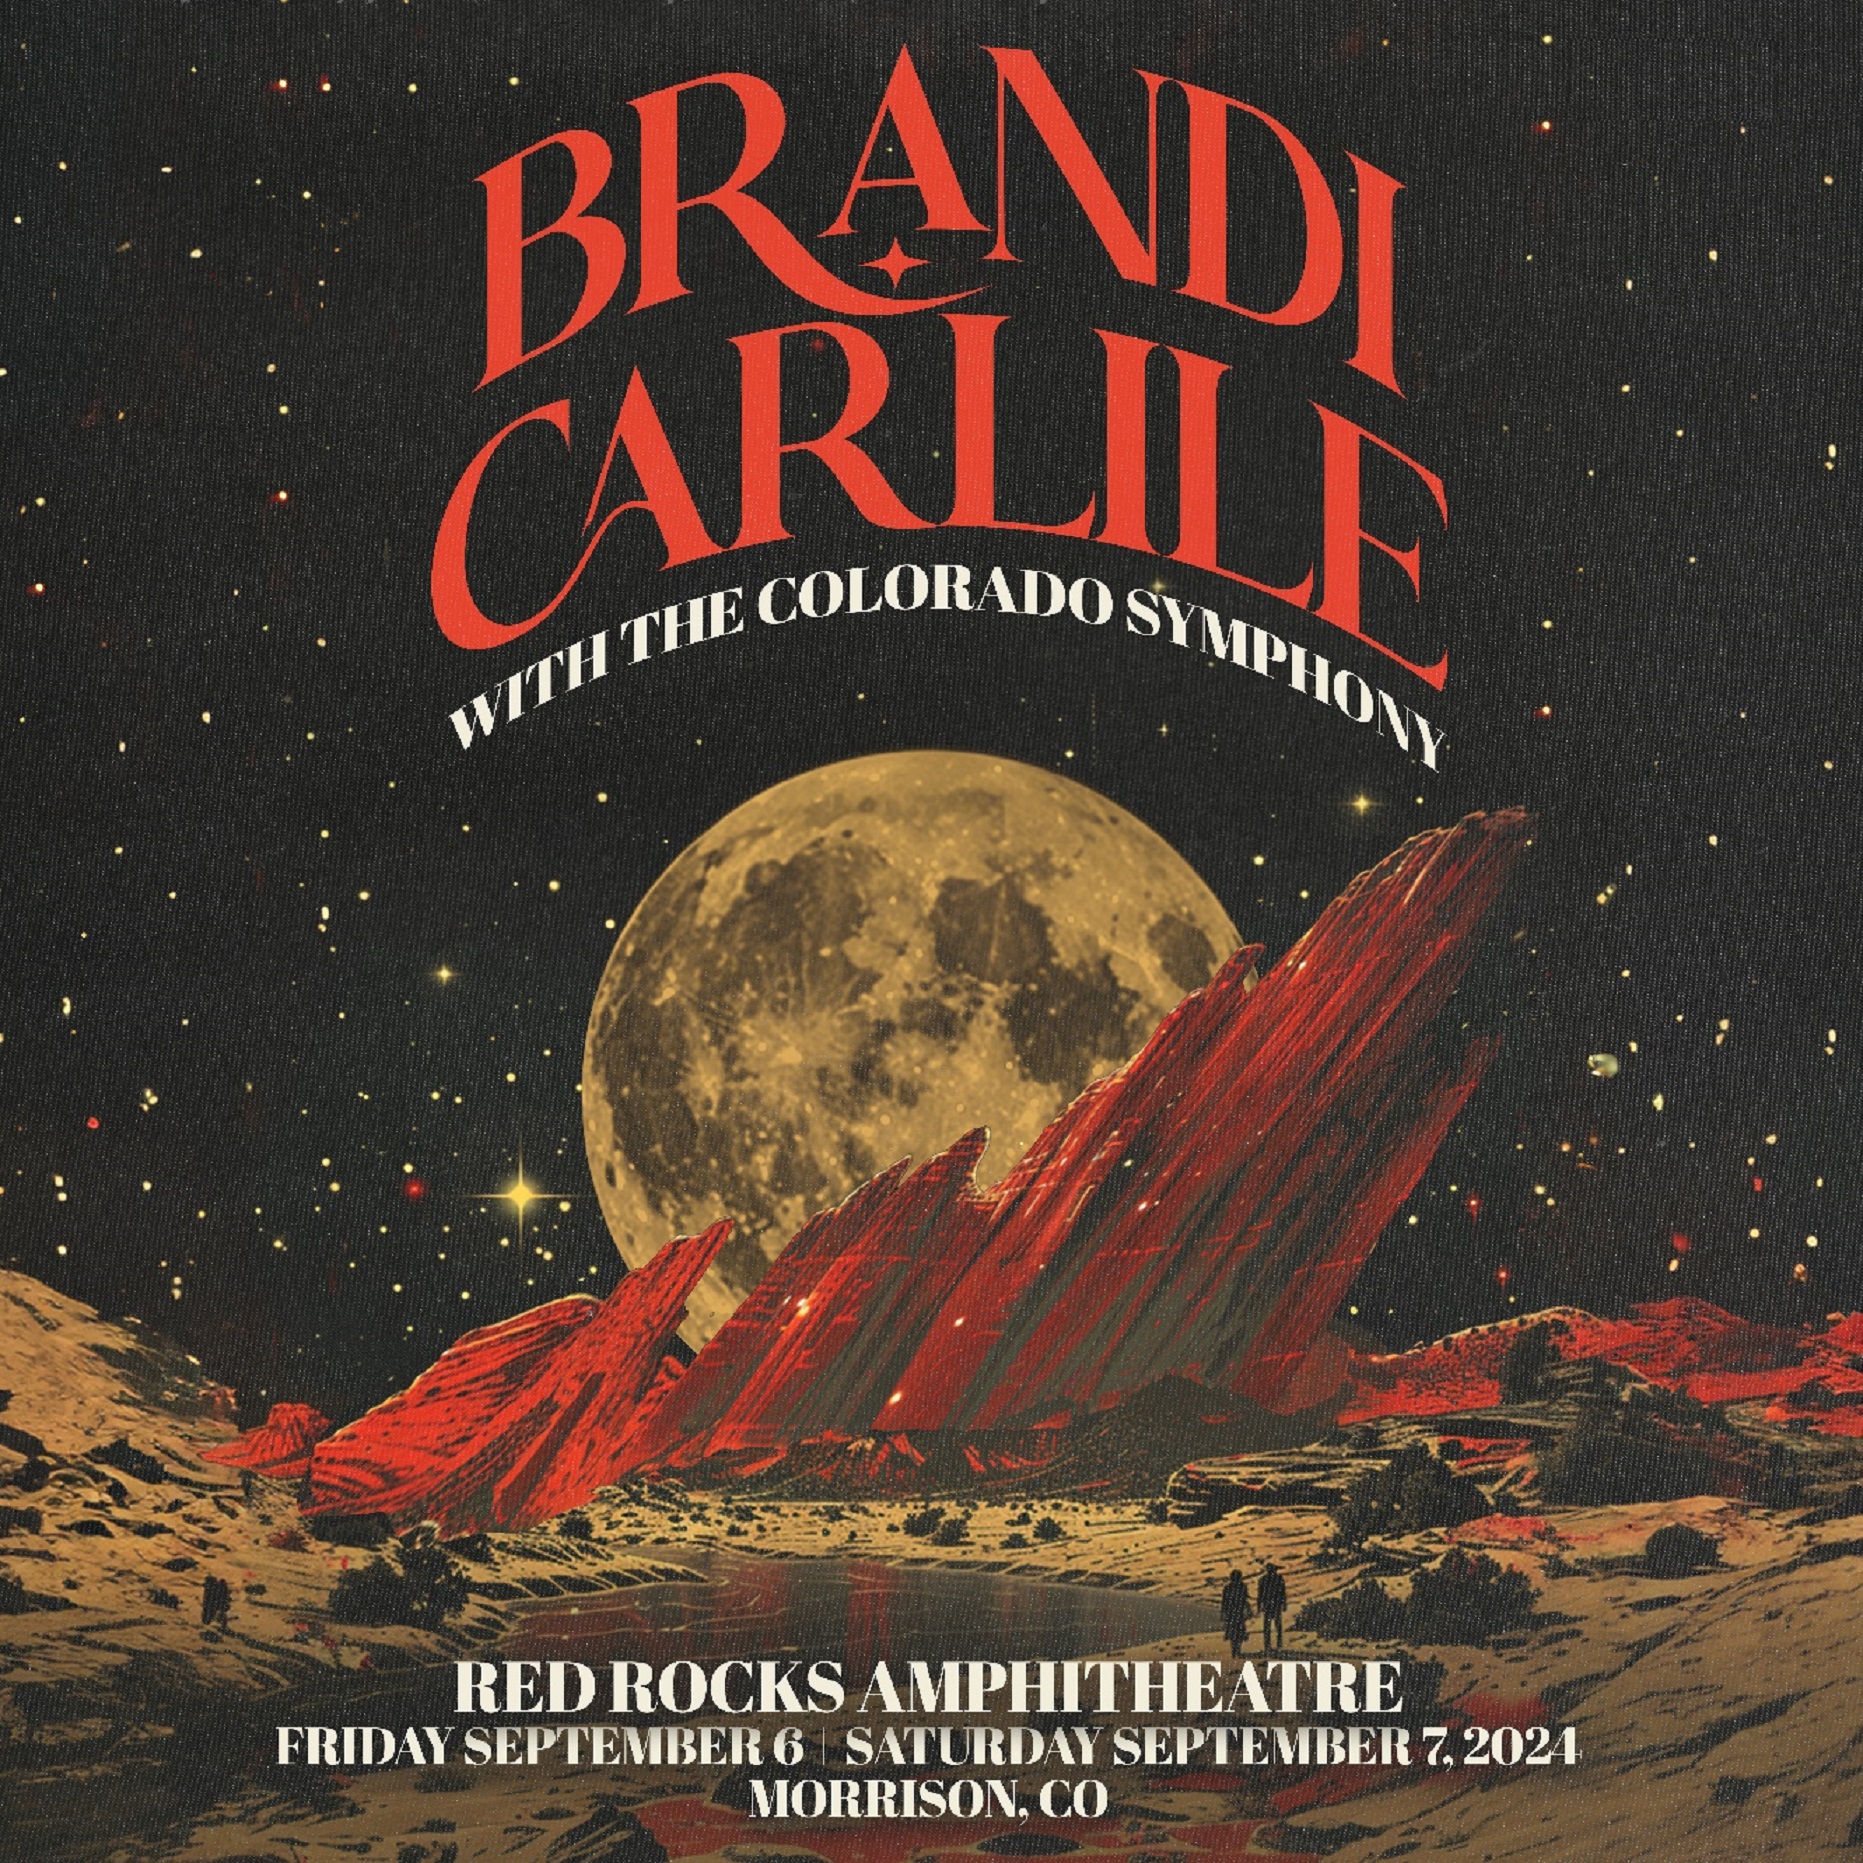 BRANDI CARLILE CONFIRMS TWO NIGHTS AT RED ROCKS AMPHITHEATRE WITH THE COLORADO SYMPHONY ON SEPTEMBER 6 AND 7